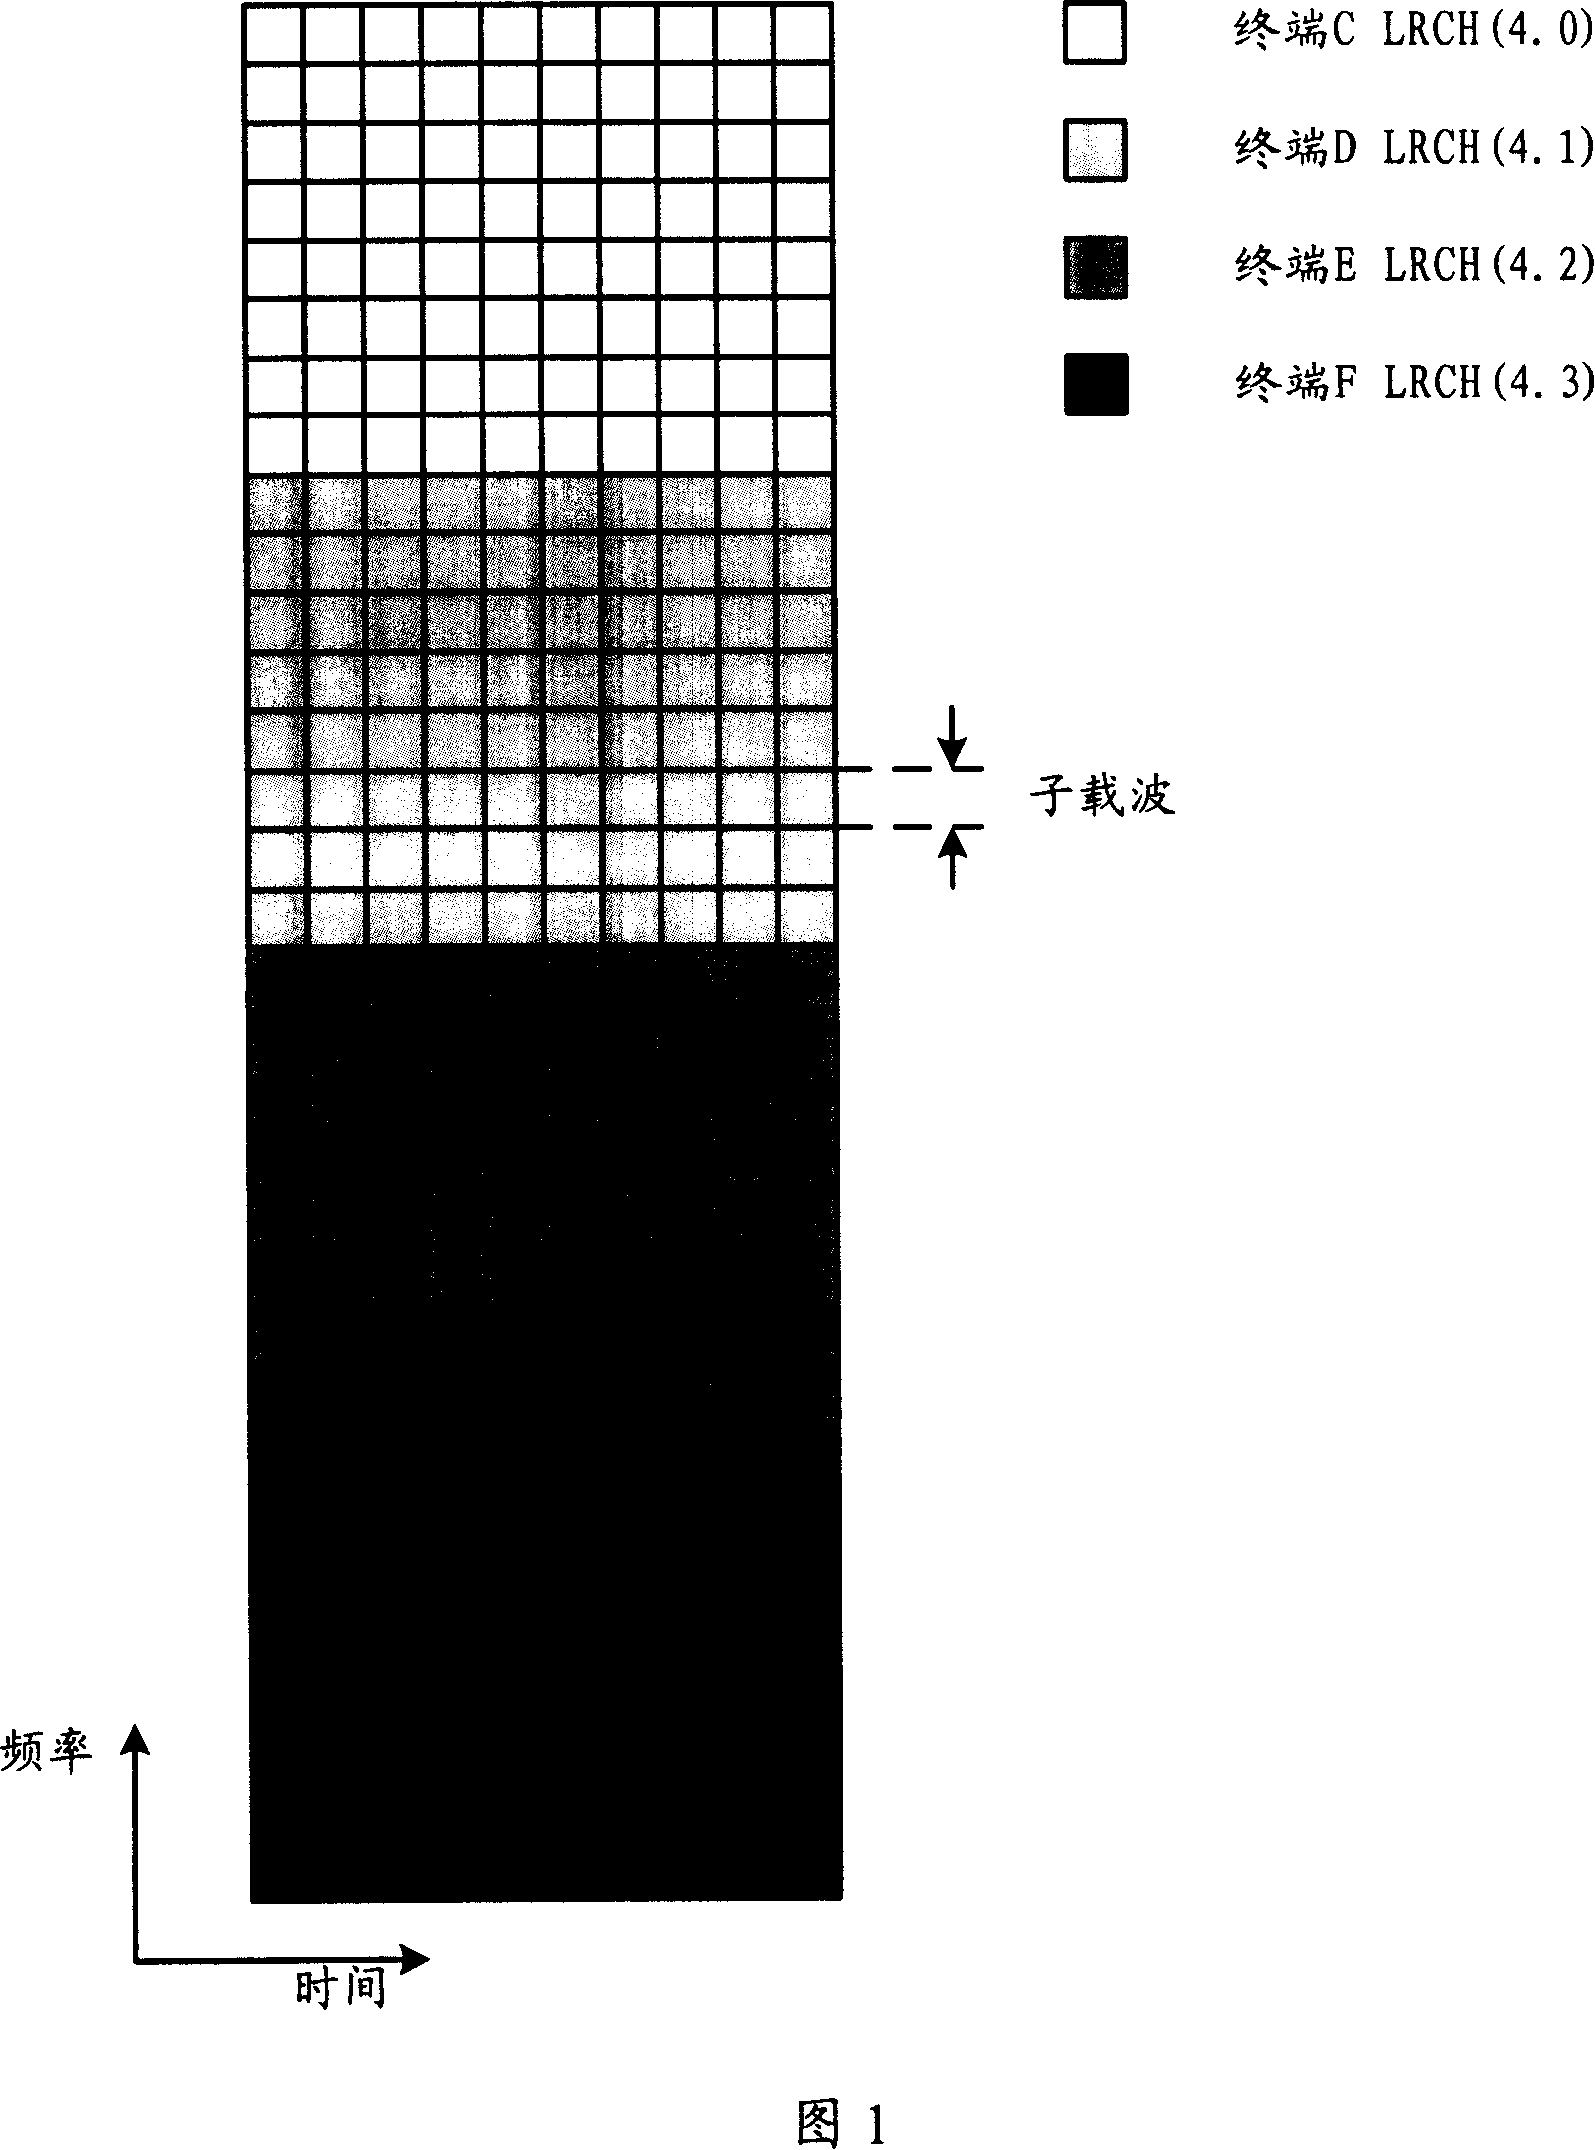 Orthogonal frequency division multi-address access system and its device, transmission method and terminal